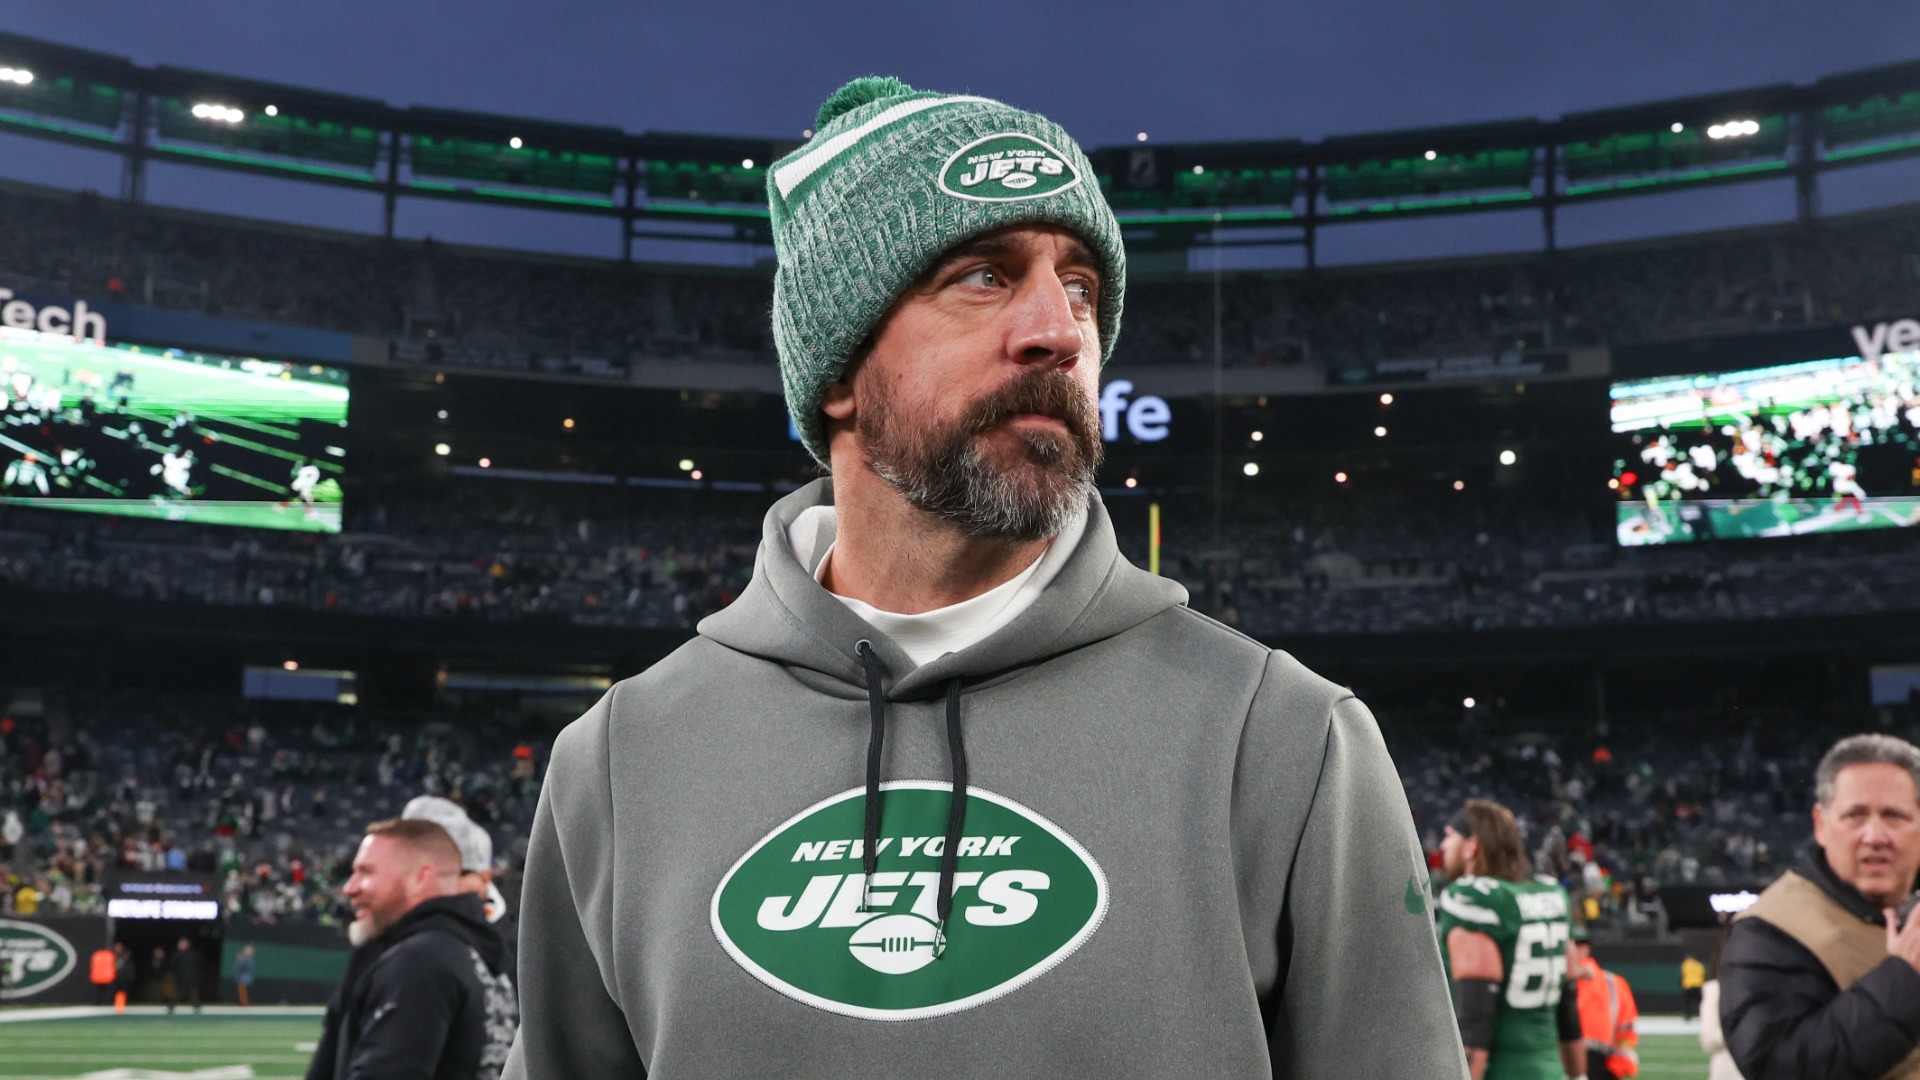 Aaron Rodgers Not Thrilled With Jets’ Decision To Put Him On Active
Roster